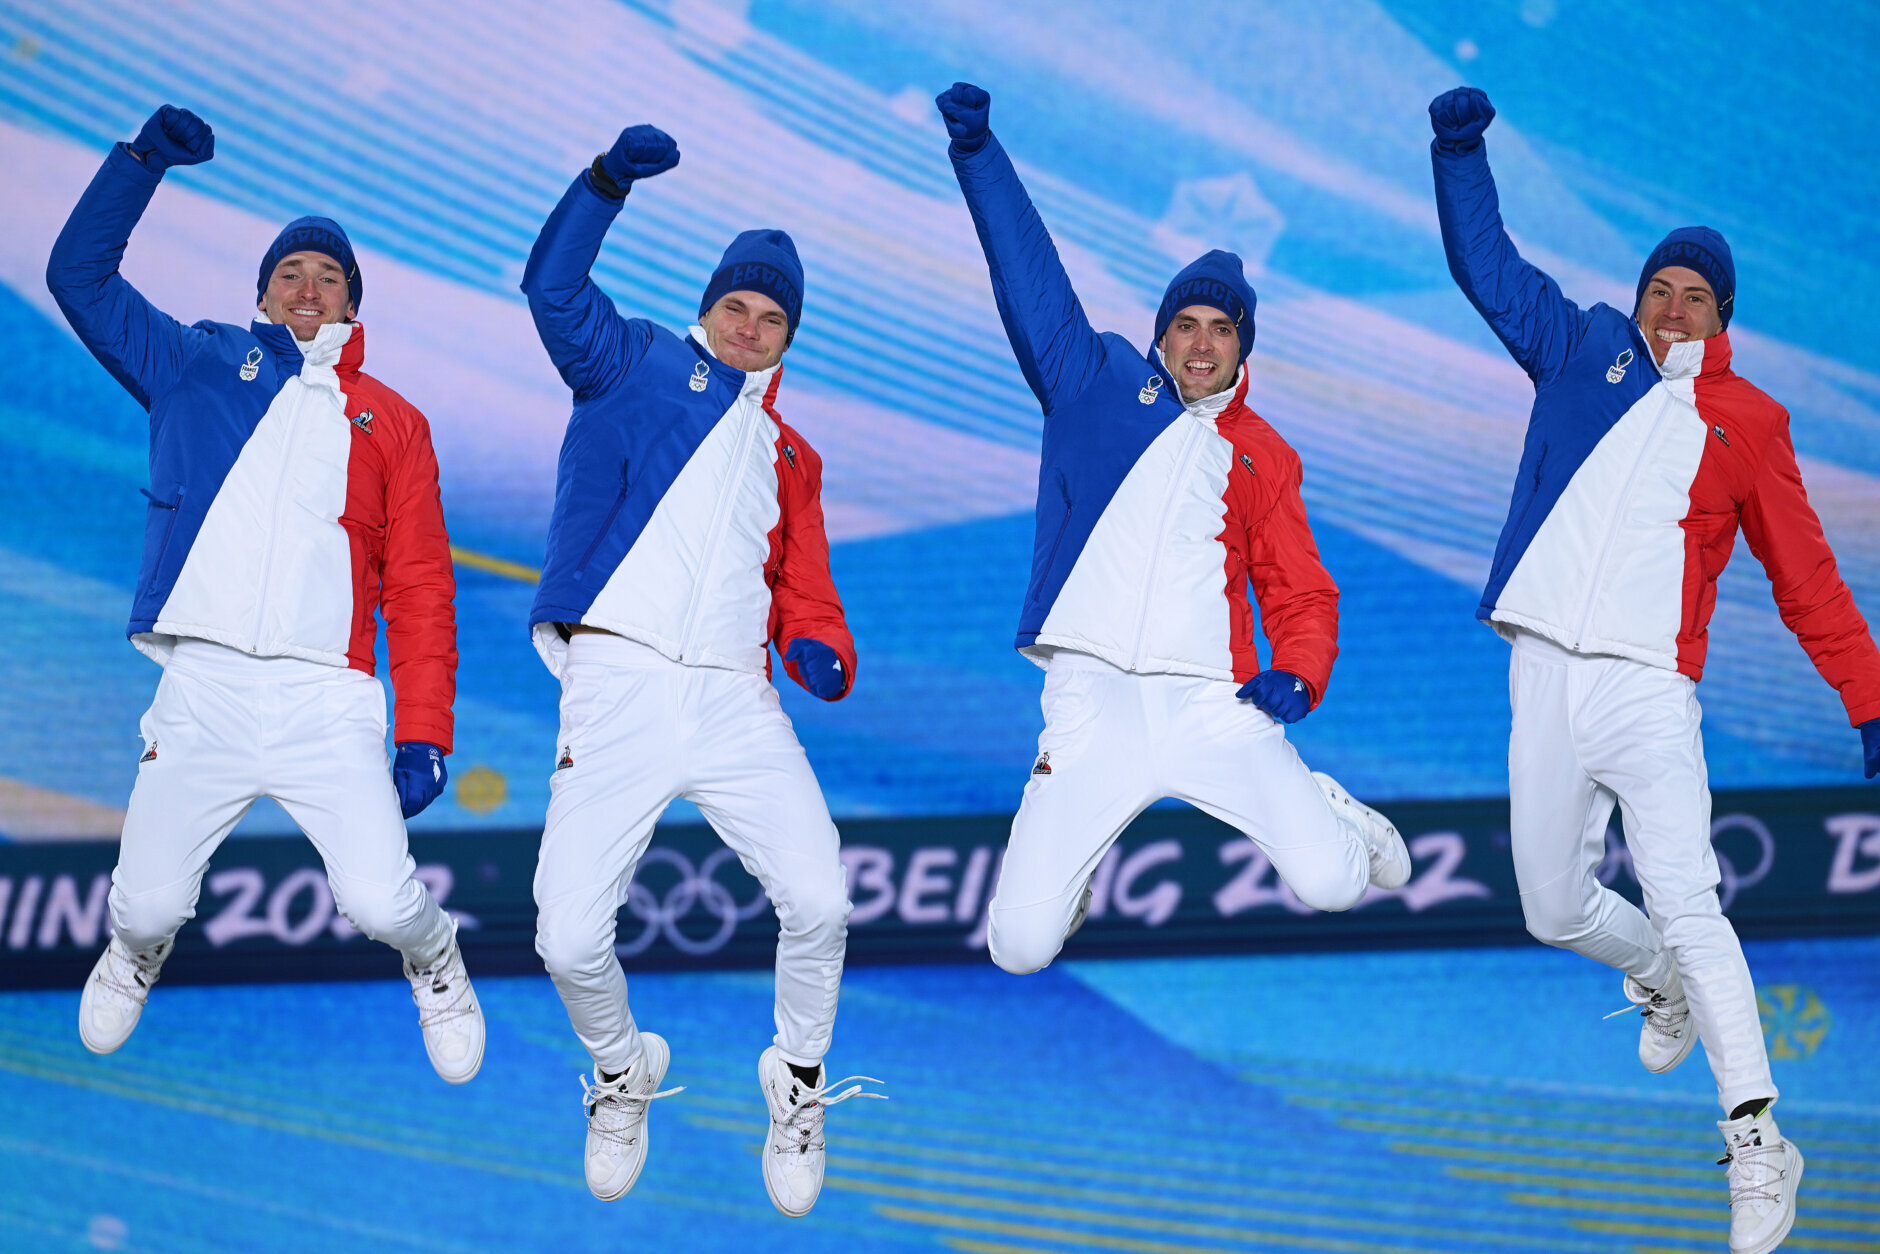 ZHANGJIAKOU, CHINA - FEBRUARY 16: Silver medallists Fabien Claude, Emilien Jacquelin, Simon Desthieux and Quentin Fillon Maillet of Team France celebrate during the Men's Biathlon 4x7.5km Relay medal ceremony on Day 12 of the Beijing 2022 Winter Olympic Games at Zhangjiakou Medal Plaza  on February 16, 2022 in Zhangjiakou, China.  (Photo by Matthias Hangst/Getty Images)